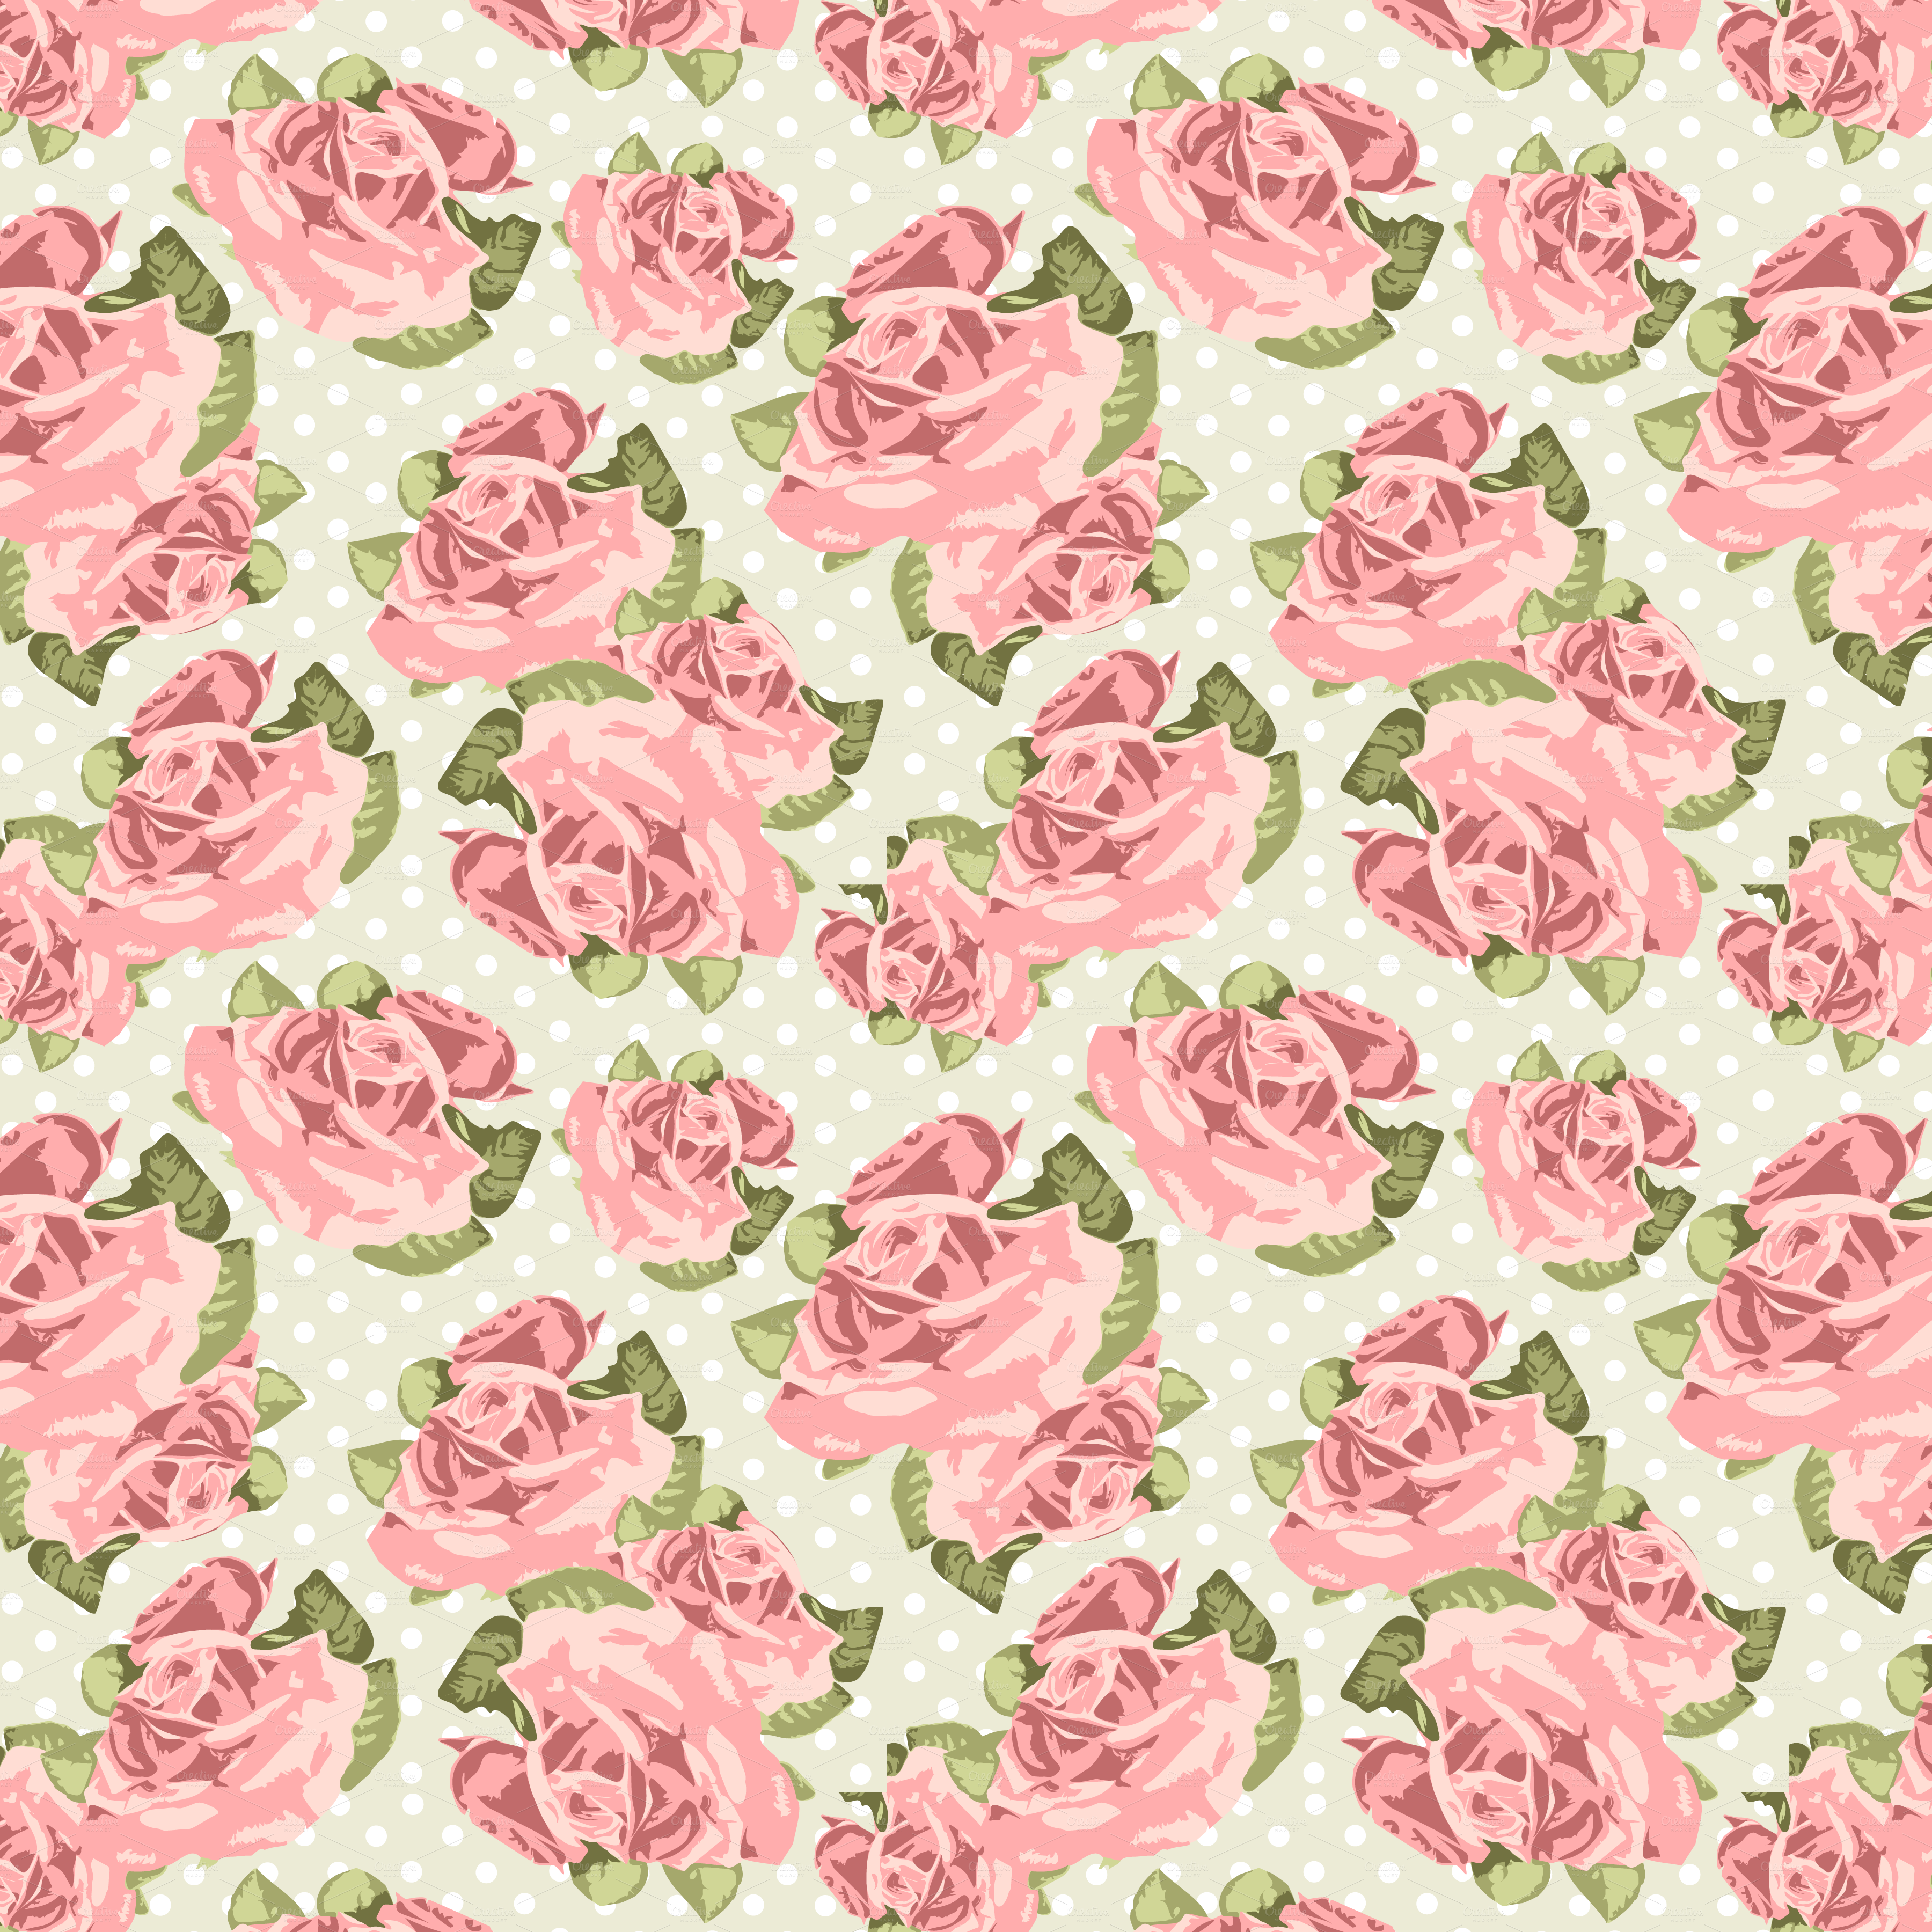 Floral Print Background Roses2 O Png